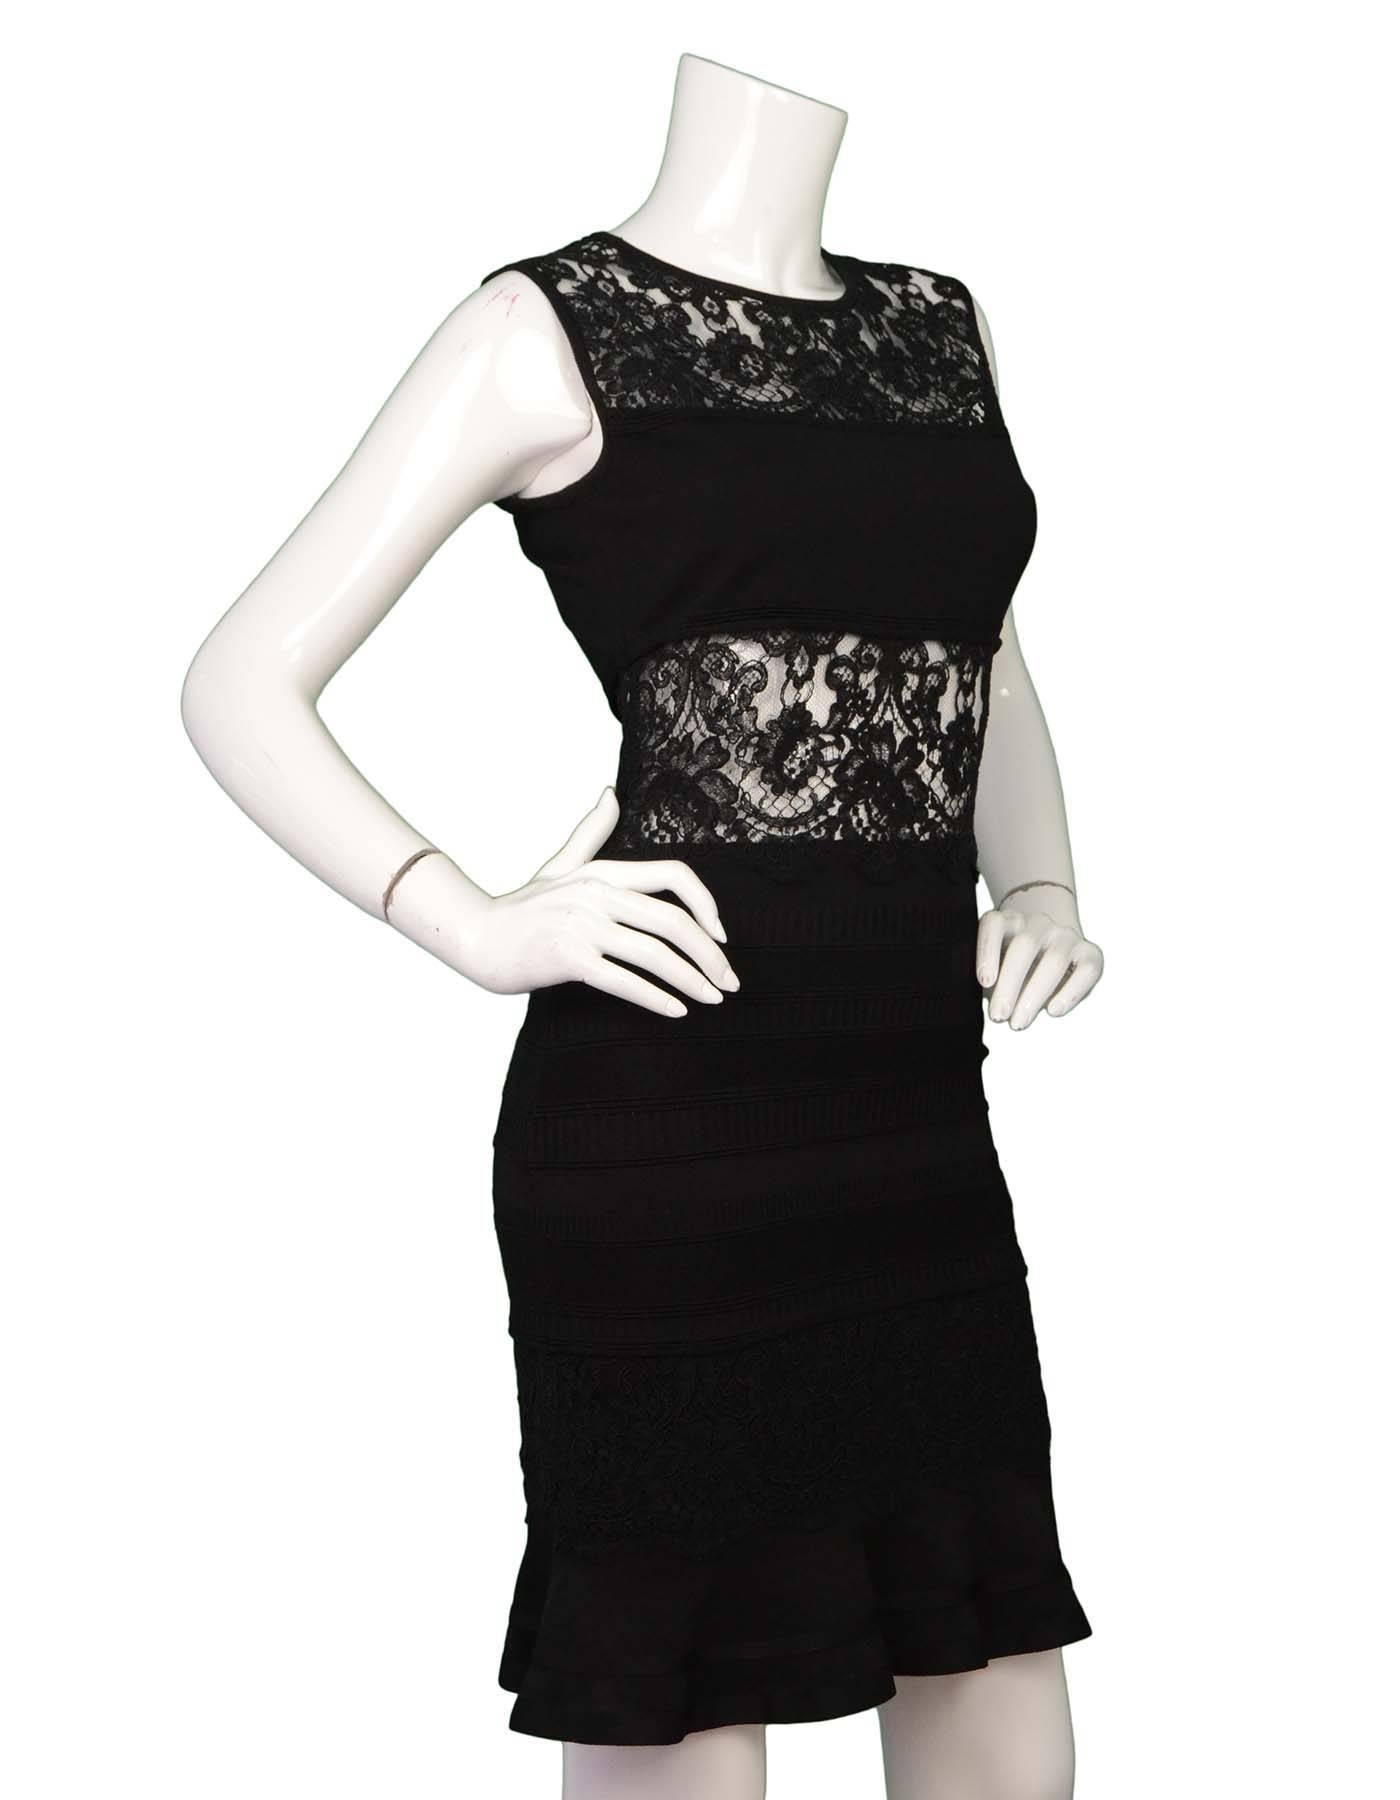 Roberto Cavalli Black Lace Sleeveless Dress Sz 40

Made In: Italy
Color: Black
Composition: 55% Rayon, 33% Wool, 11% Nylon, 1% Elasthanne
Lining: None
Closure/Opening: Hidden side zip closure
Retail Price: $1,860 + tax
Overall Condition: